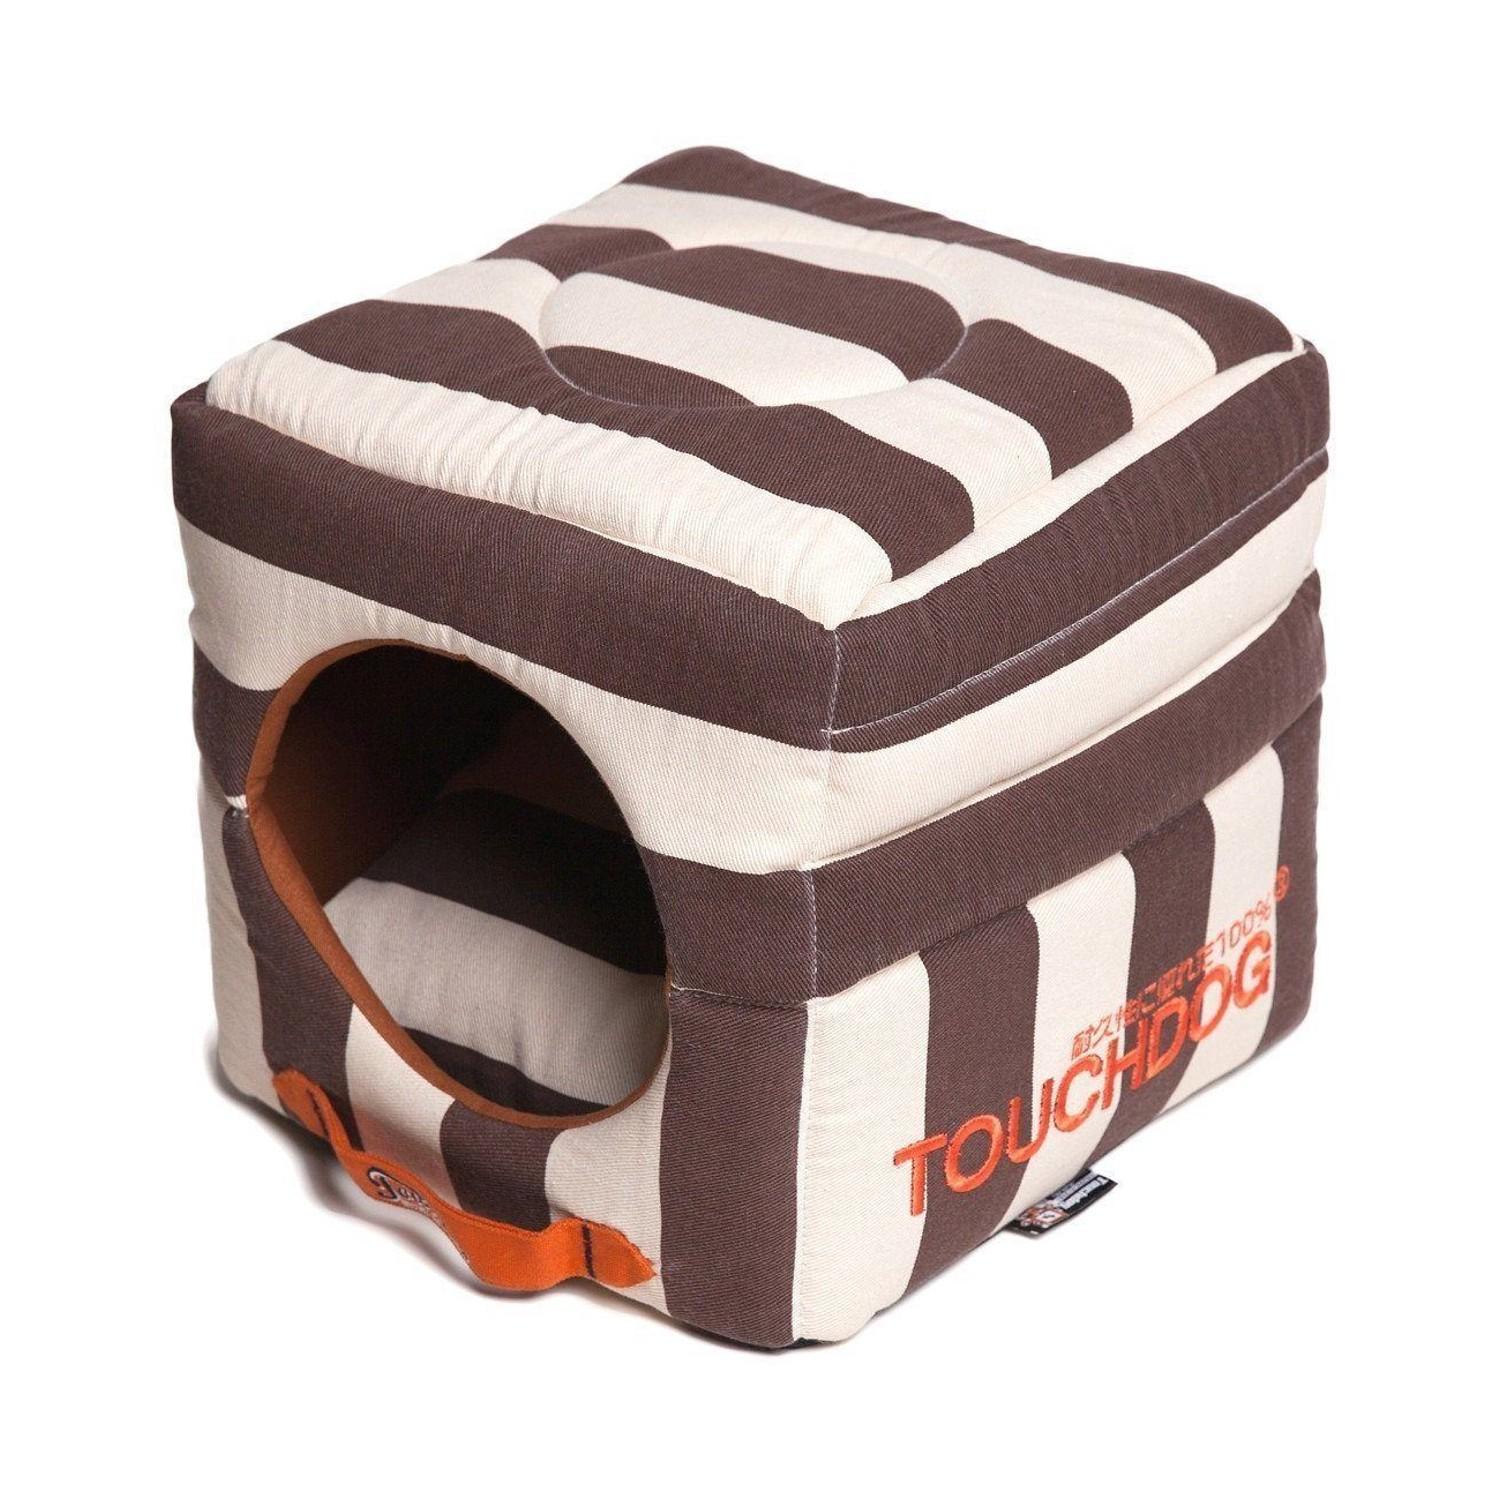 Pet Life Touchdog Polo-Striped 2-in-1 Collapsible Dog and Cat Bed - Cocoa Brown and White